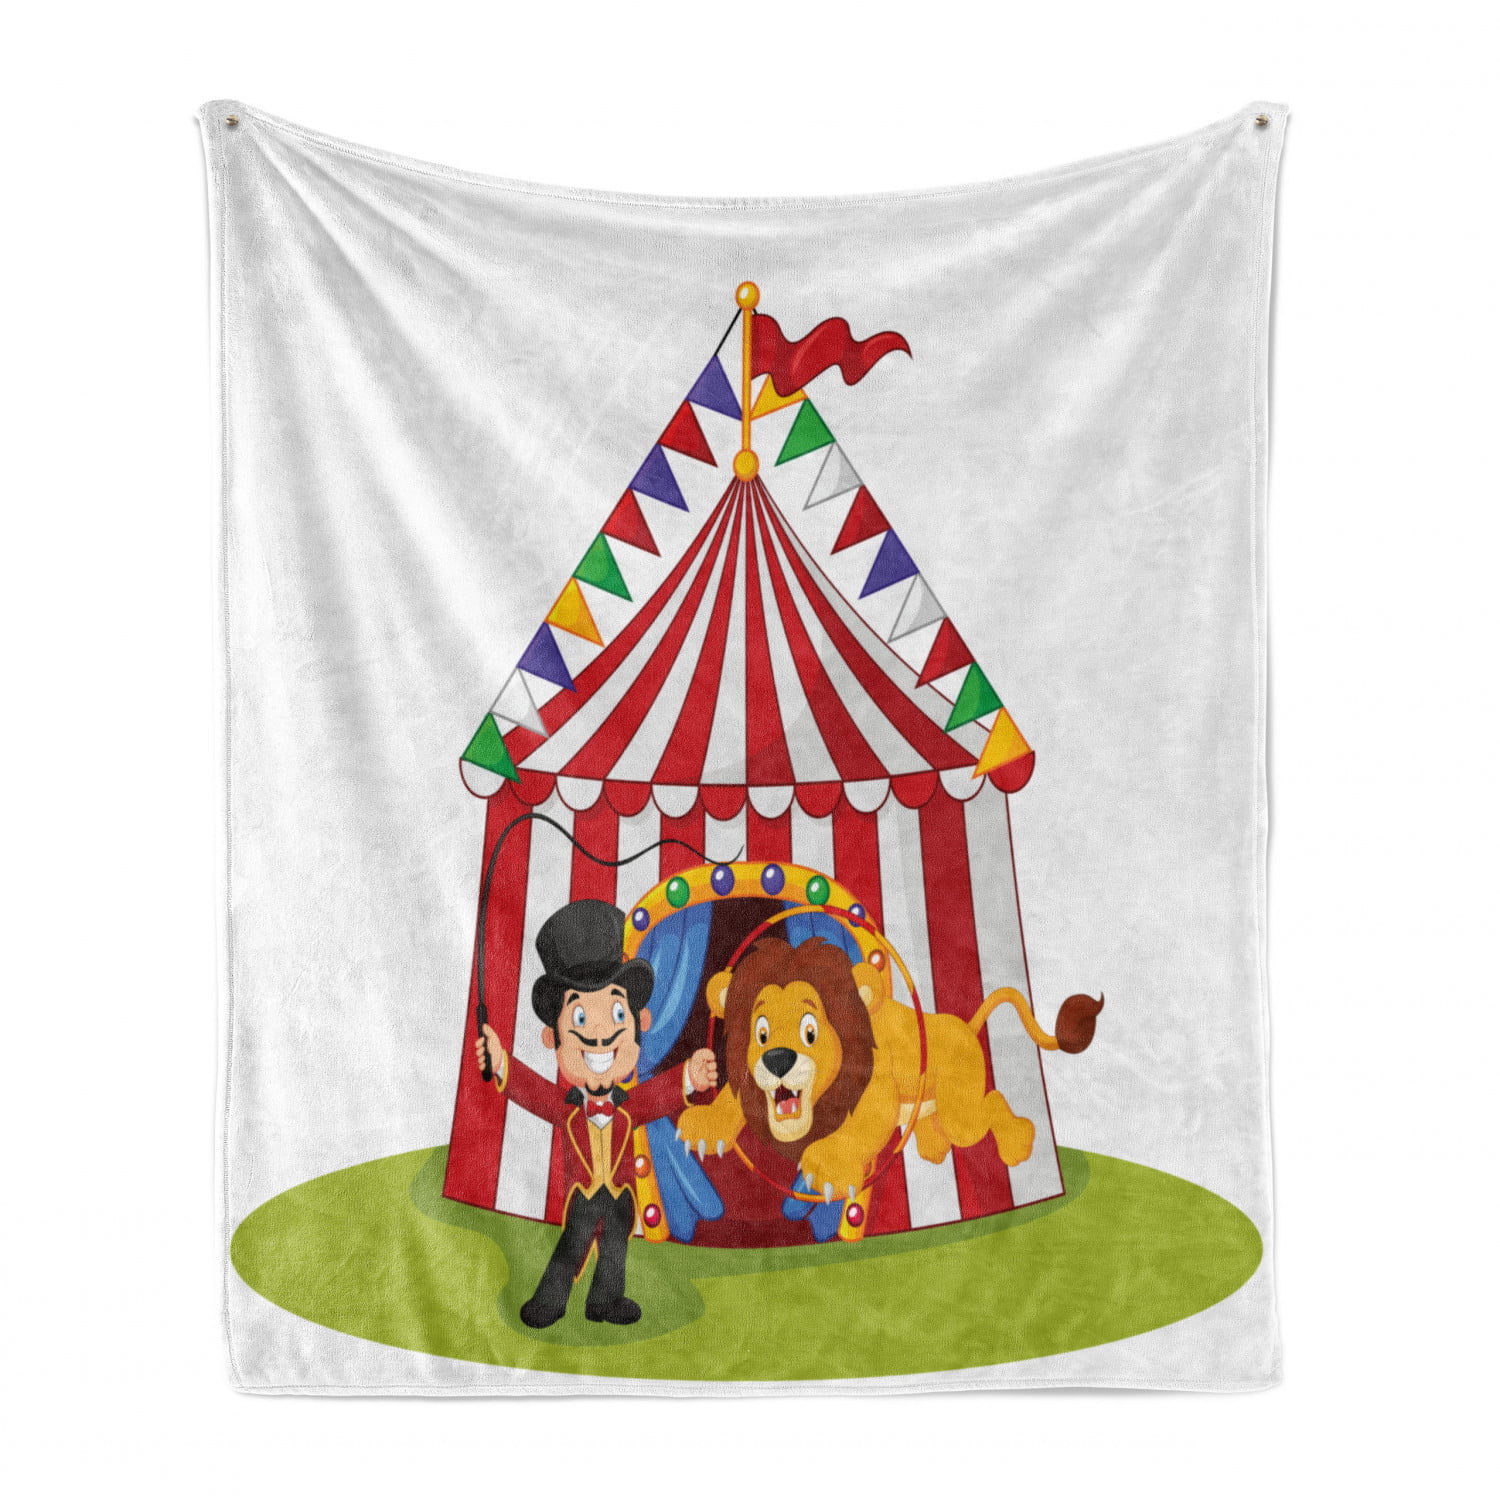 50 x 60 Cozy Plush for Indoor and Outdoor Use Lion Jumping Through The Ring with Circus Tent Celebration Performance Show Multicolor Ambesonne Circus Soft Flannel Fleece Throw Blanket 